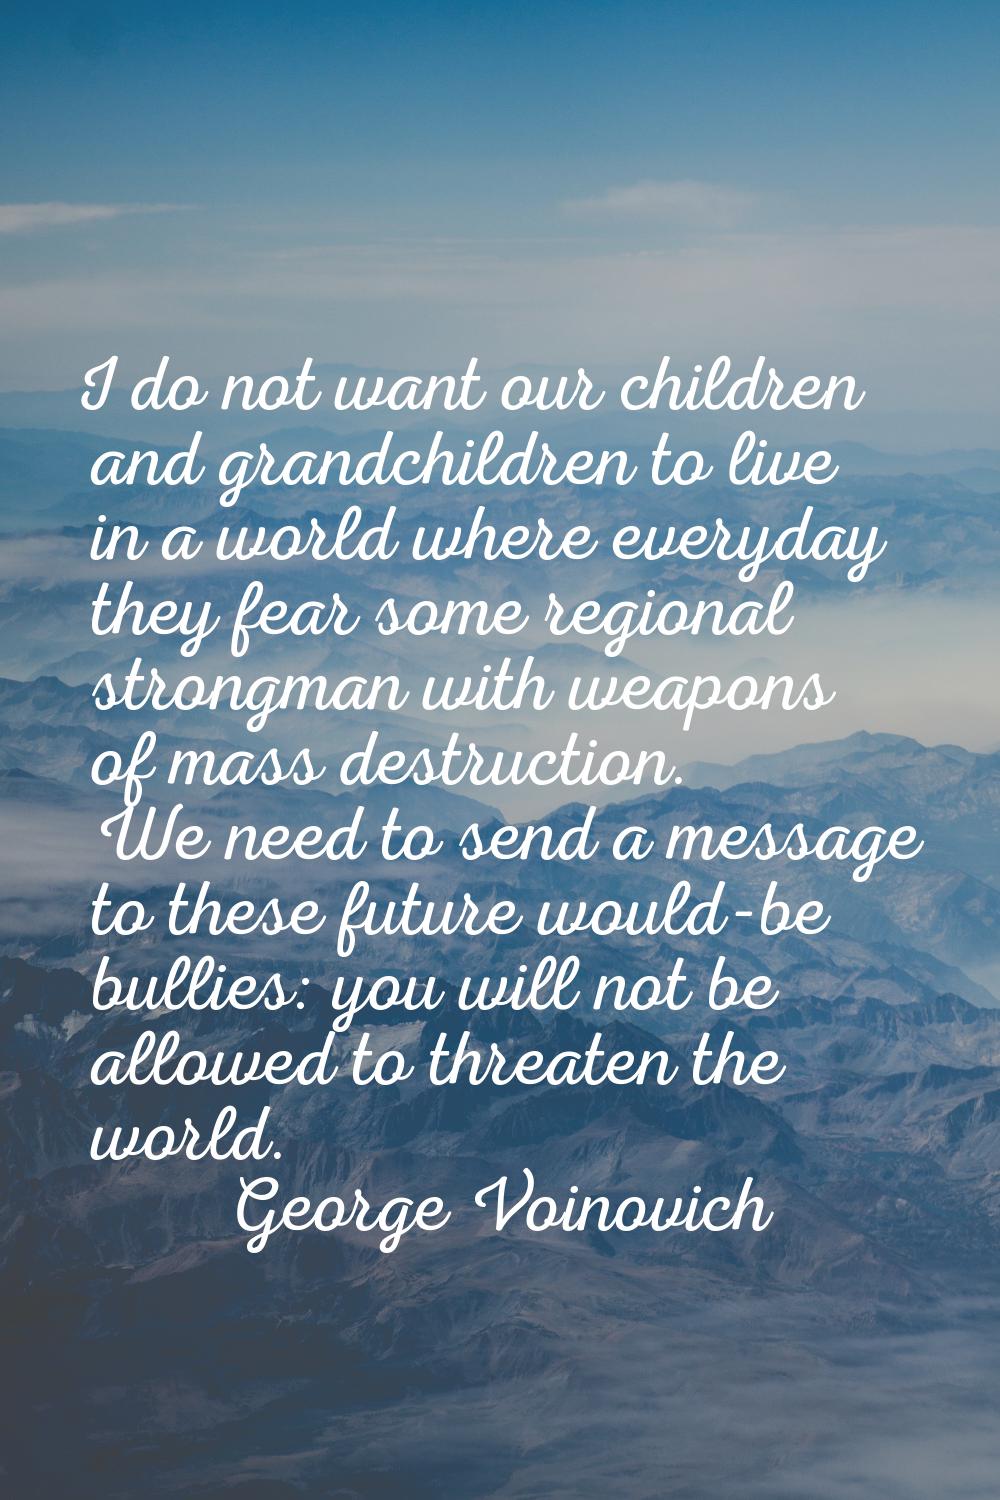 I do not want our children and grandchildren to live in a world where everyday they fear some regio